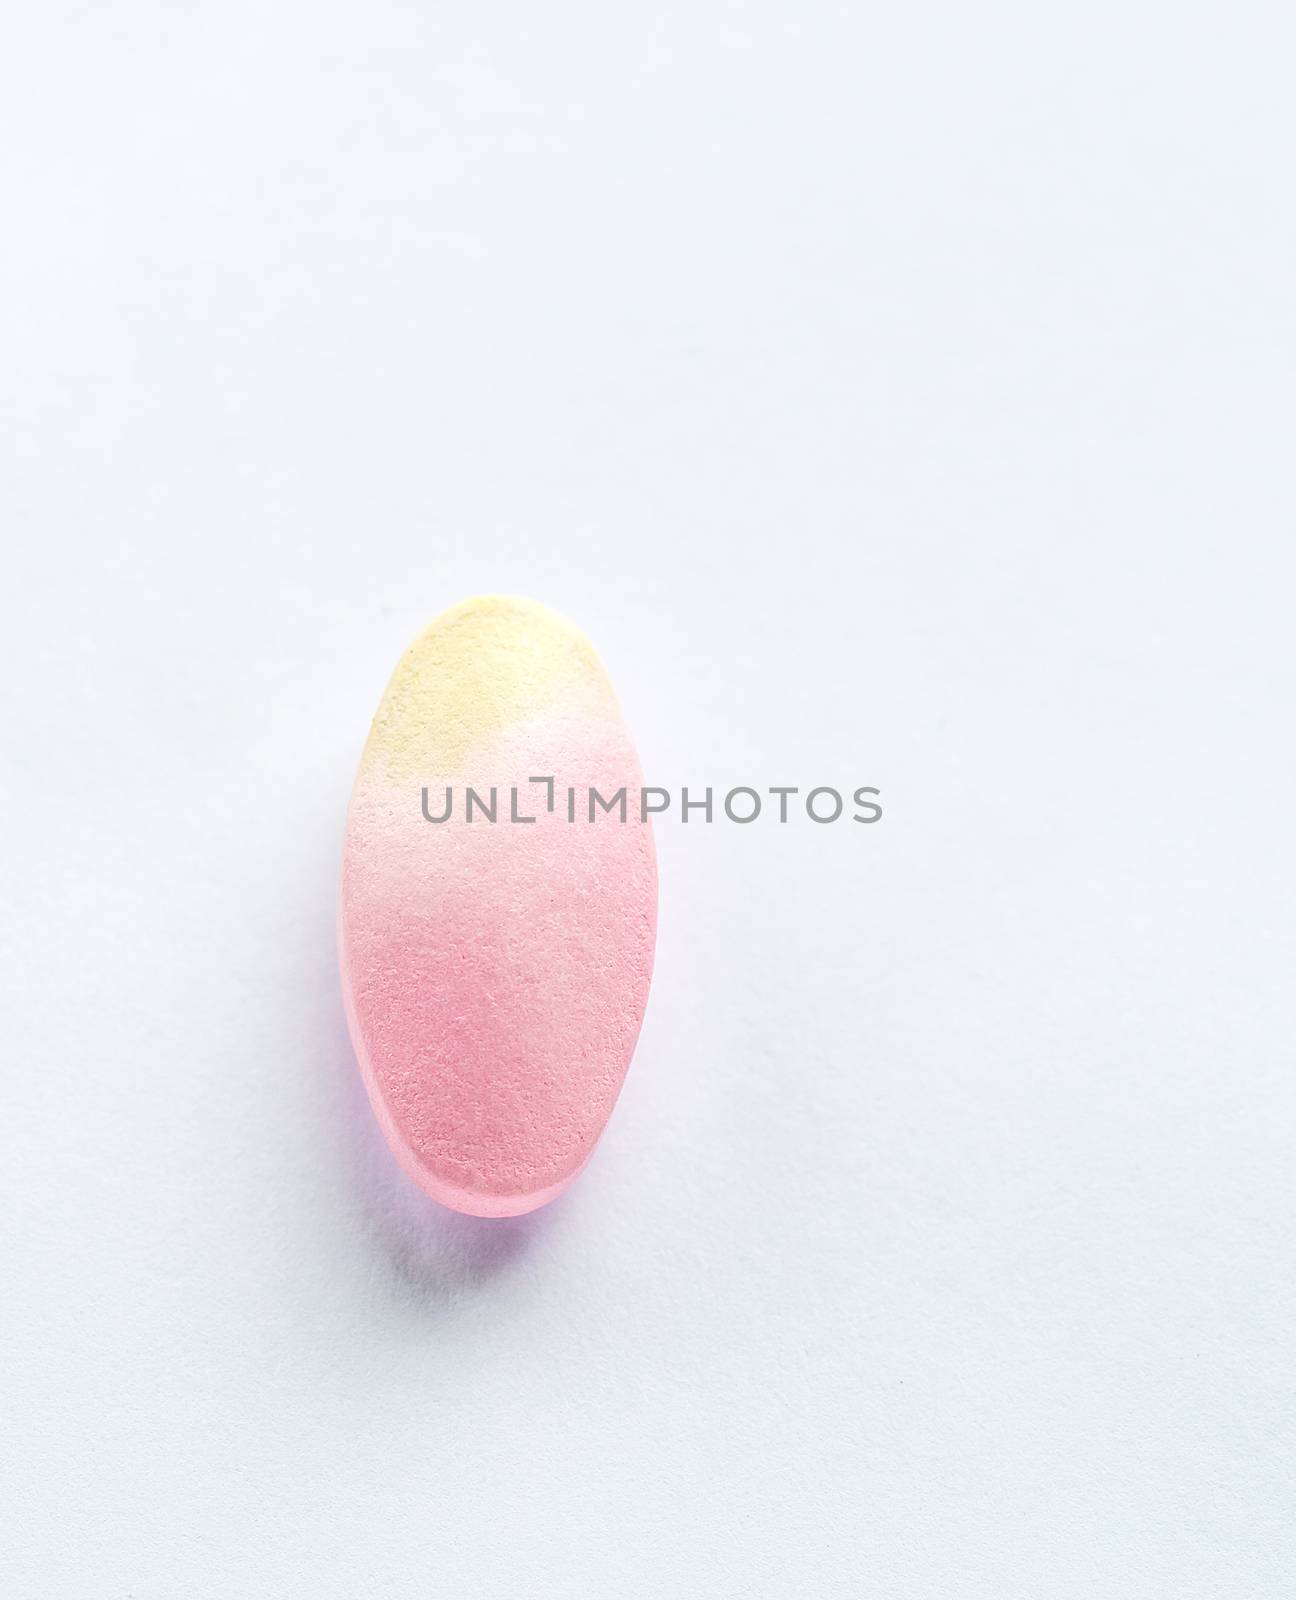 Expired calcium tablet pills with color change isolated on white background with copy space